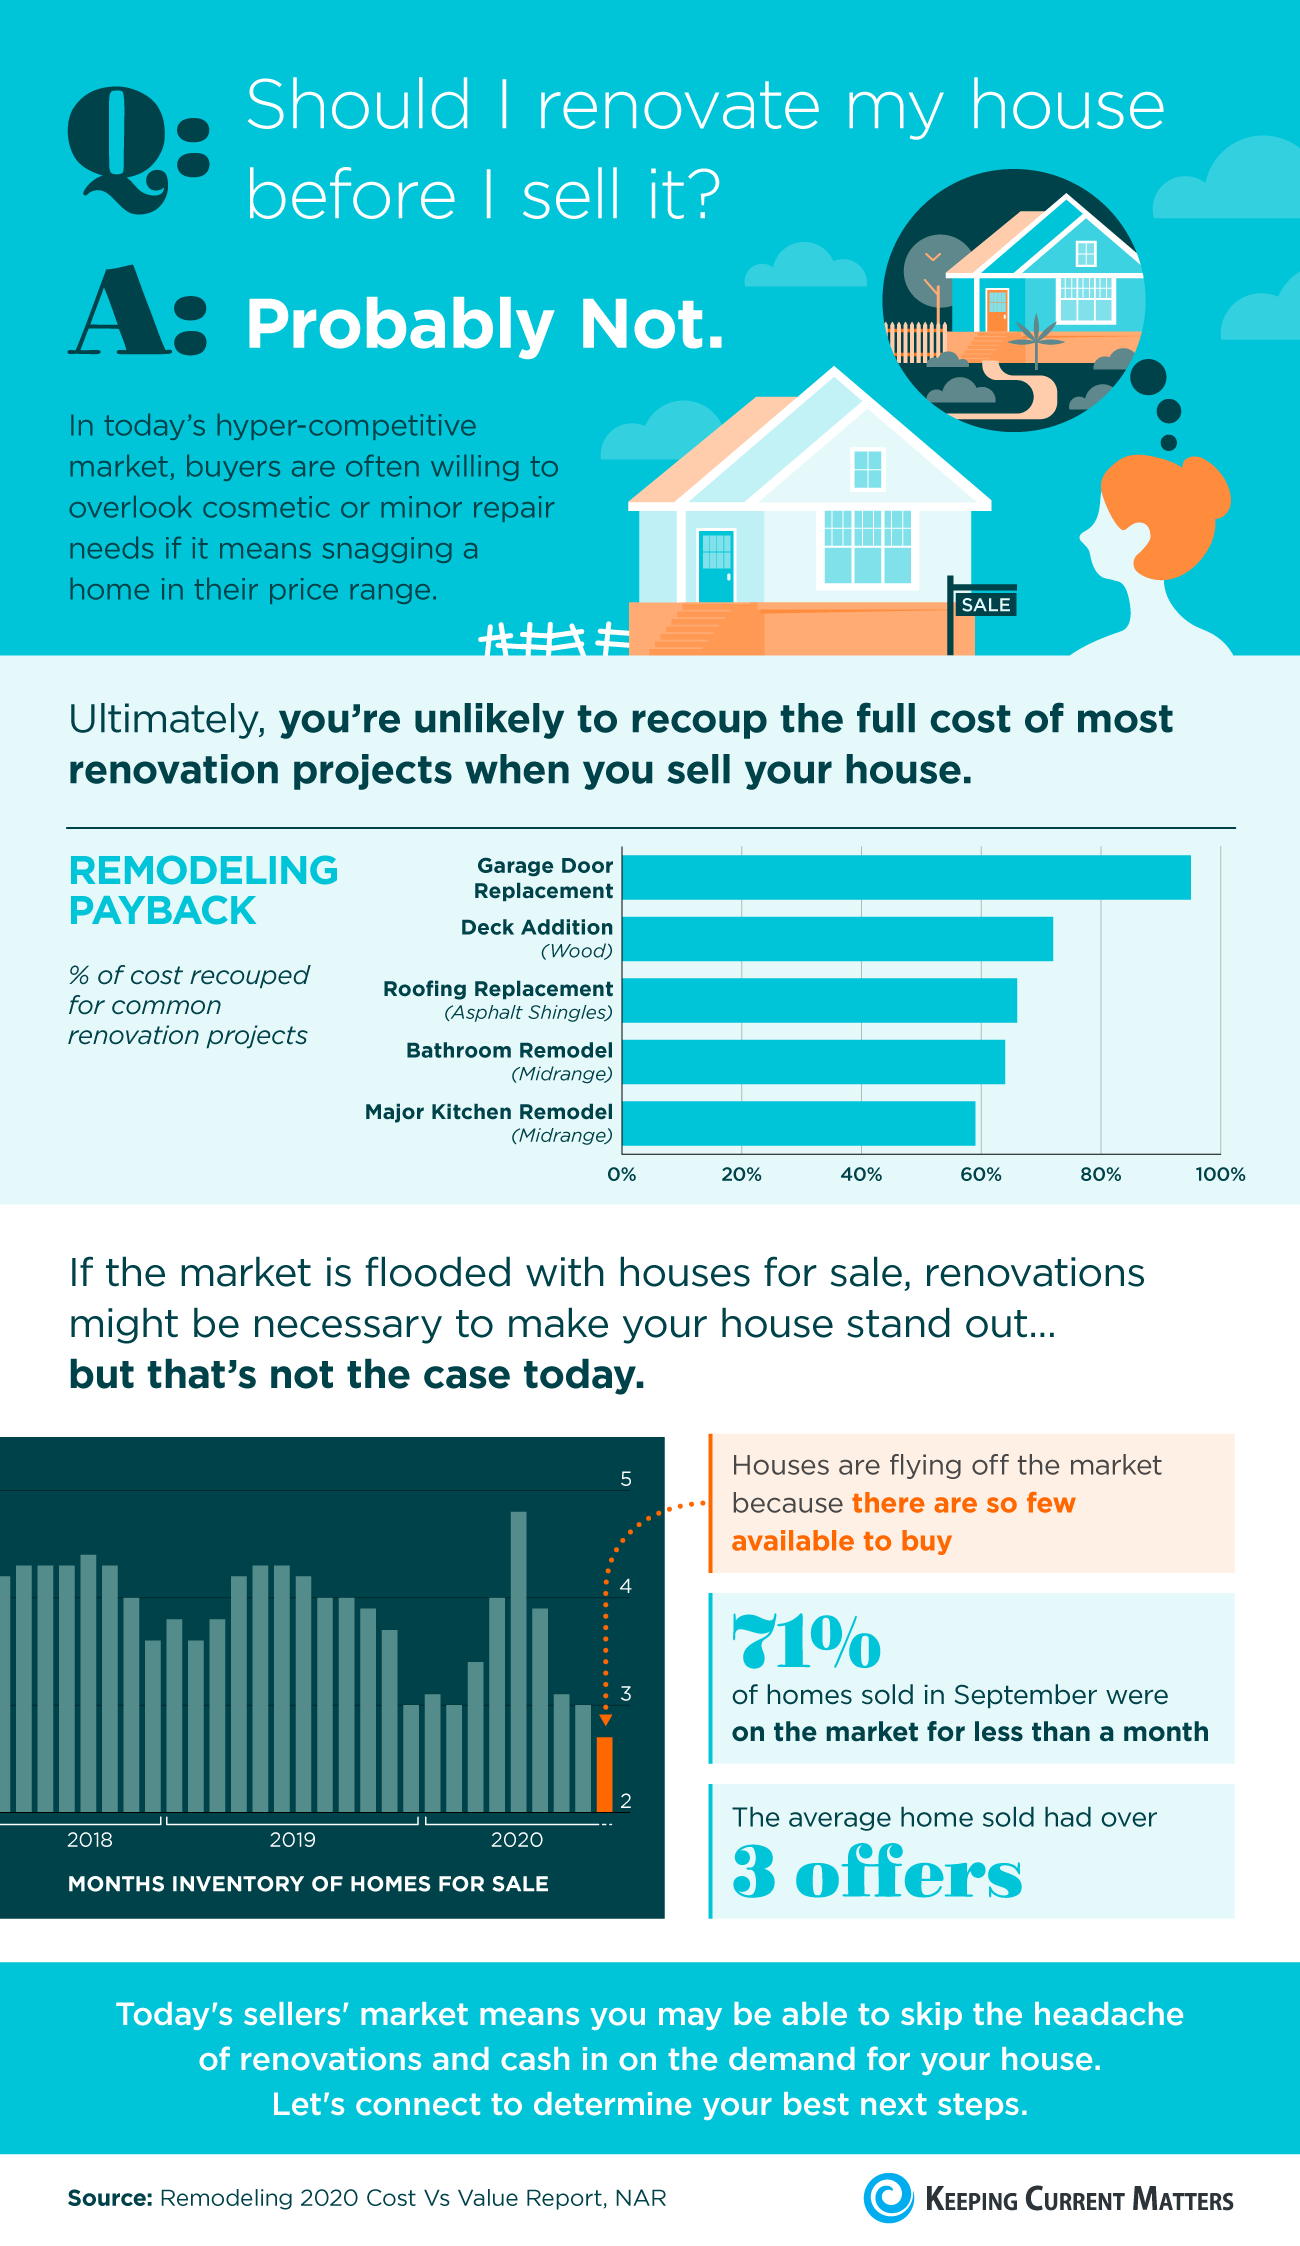 Should I Renovate My House Before I Sell It? [INFOGRAPHIC] | Keeping Current Matters